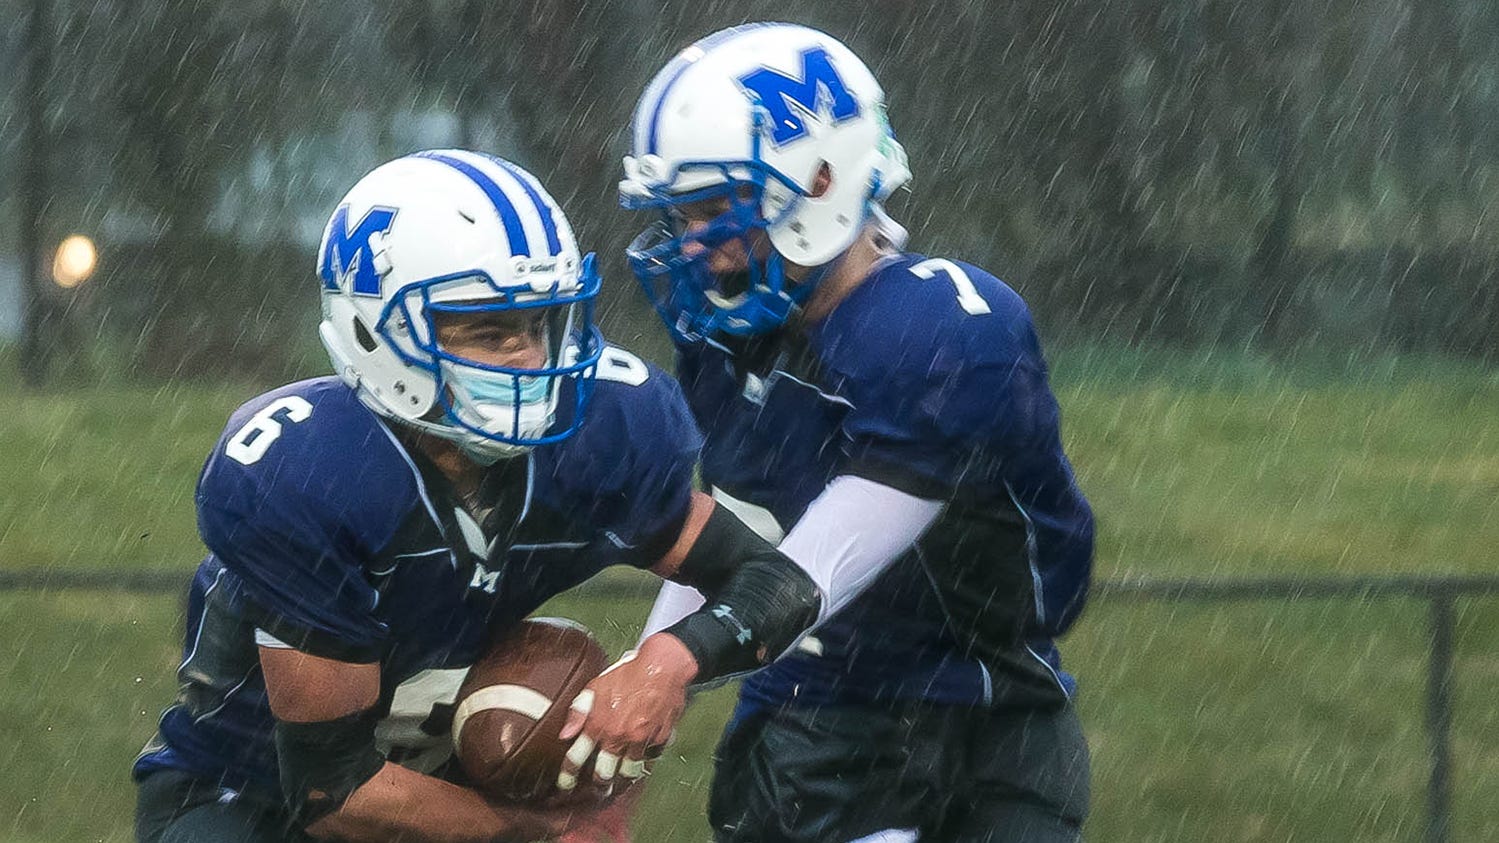 Middletown vs. Westerly high school football game canceled due to COVID